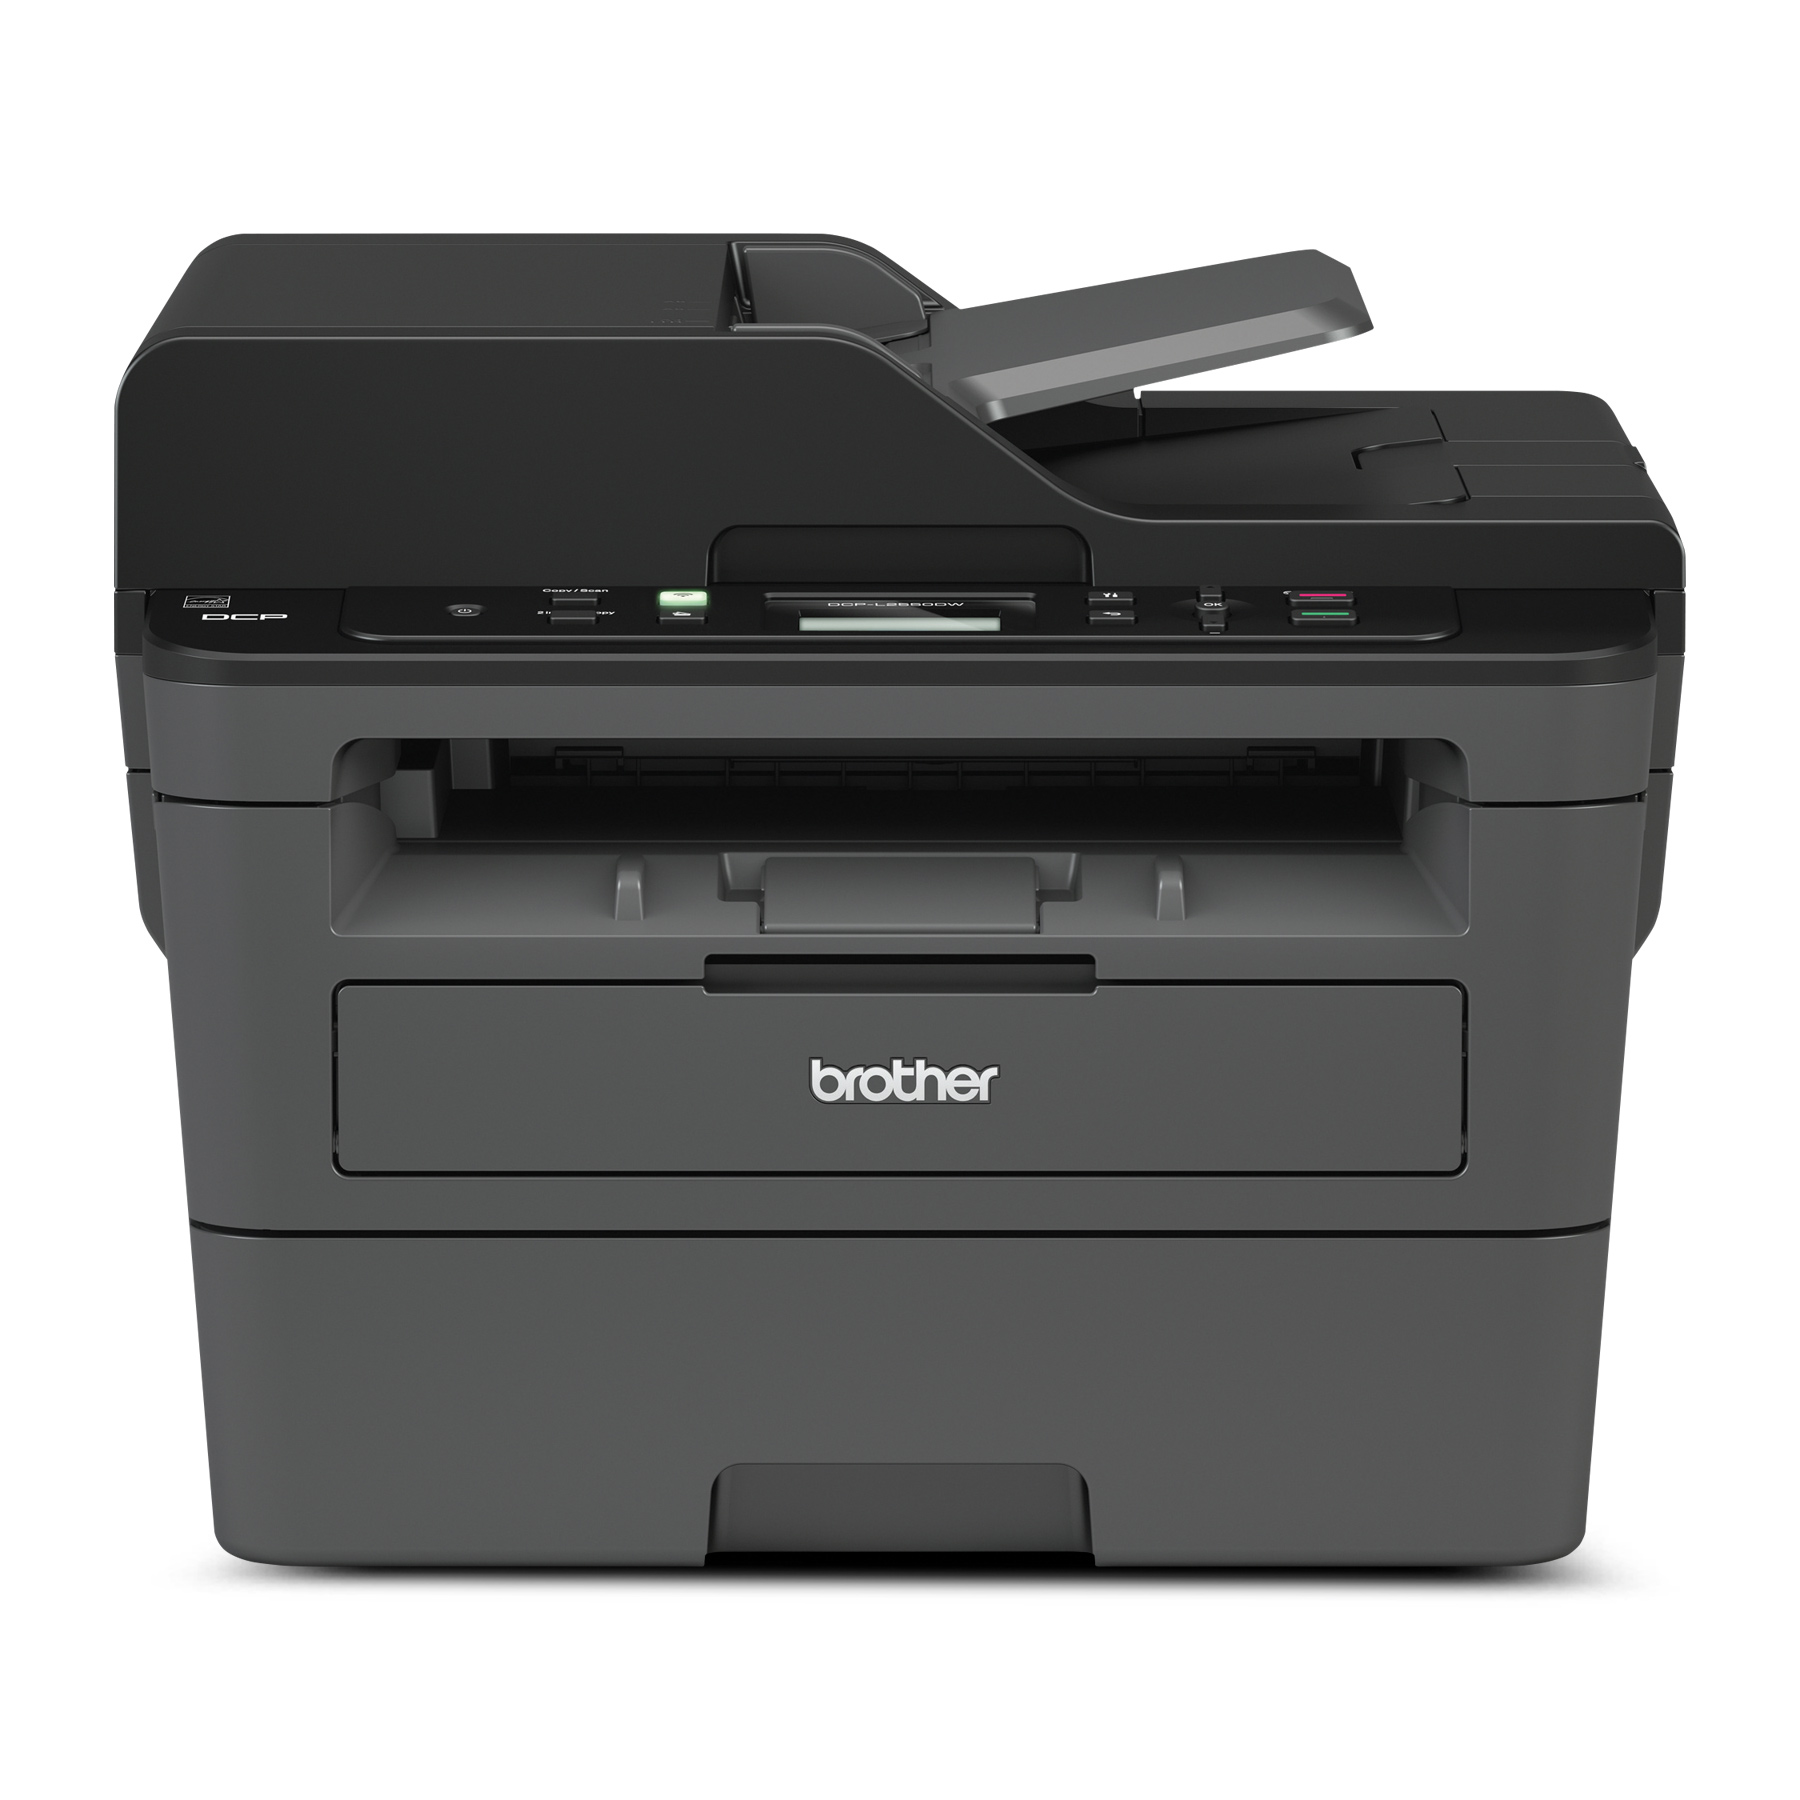 Image of Brother DCP-L2550DW Monochrome Laser Multifunction